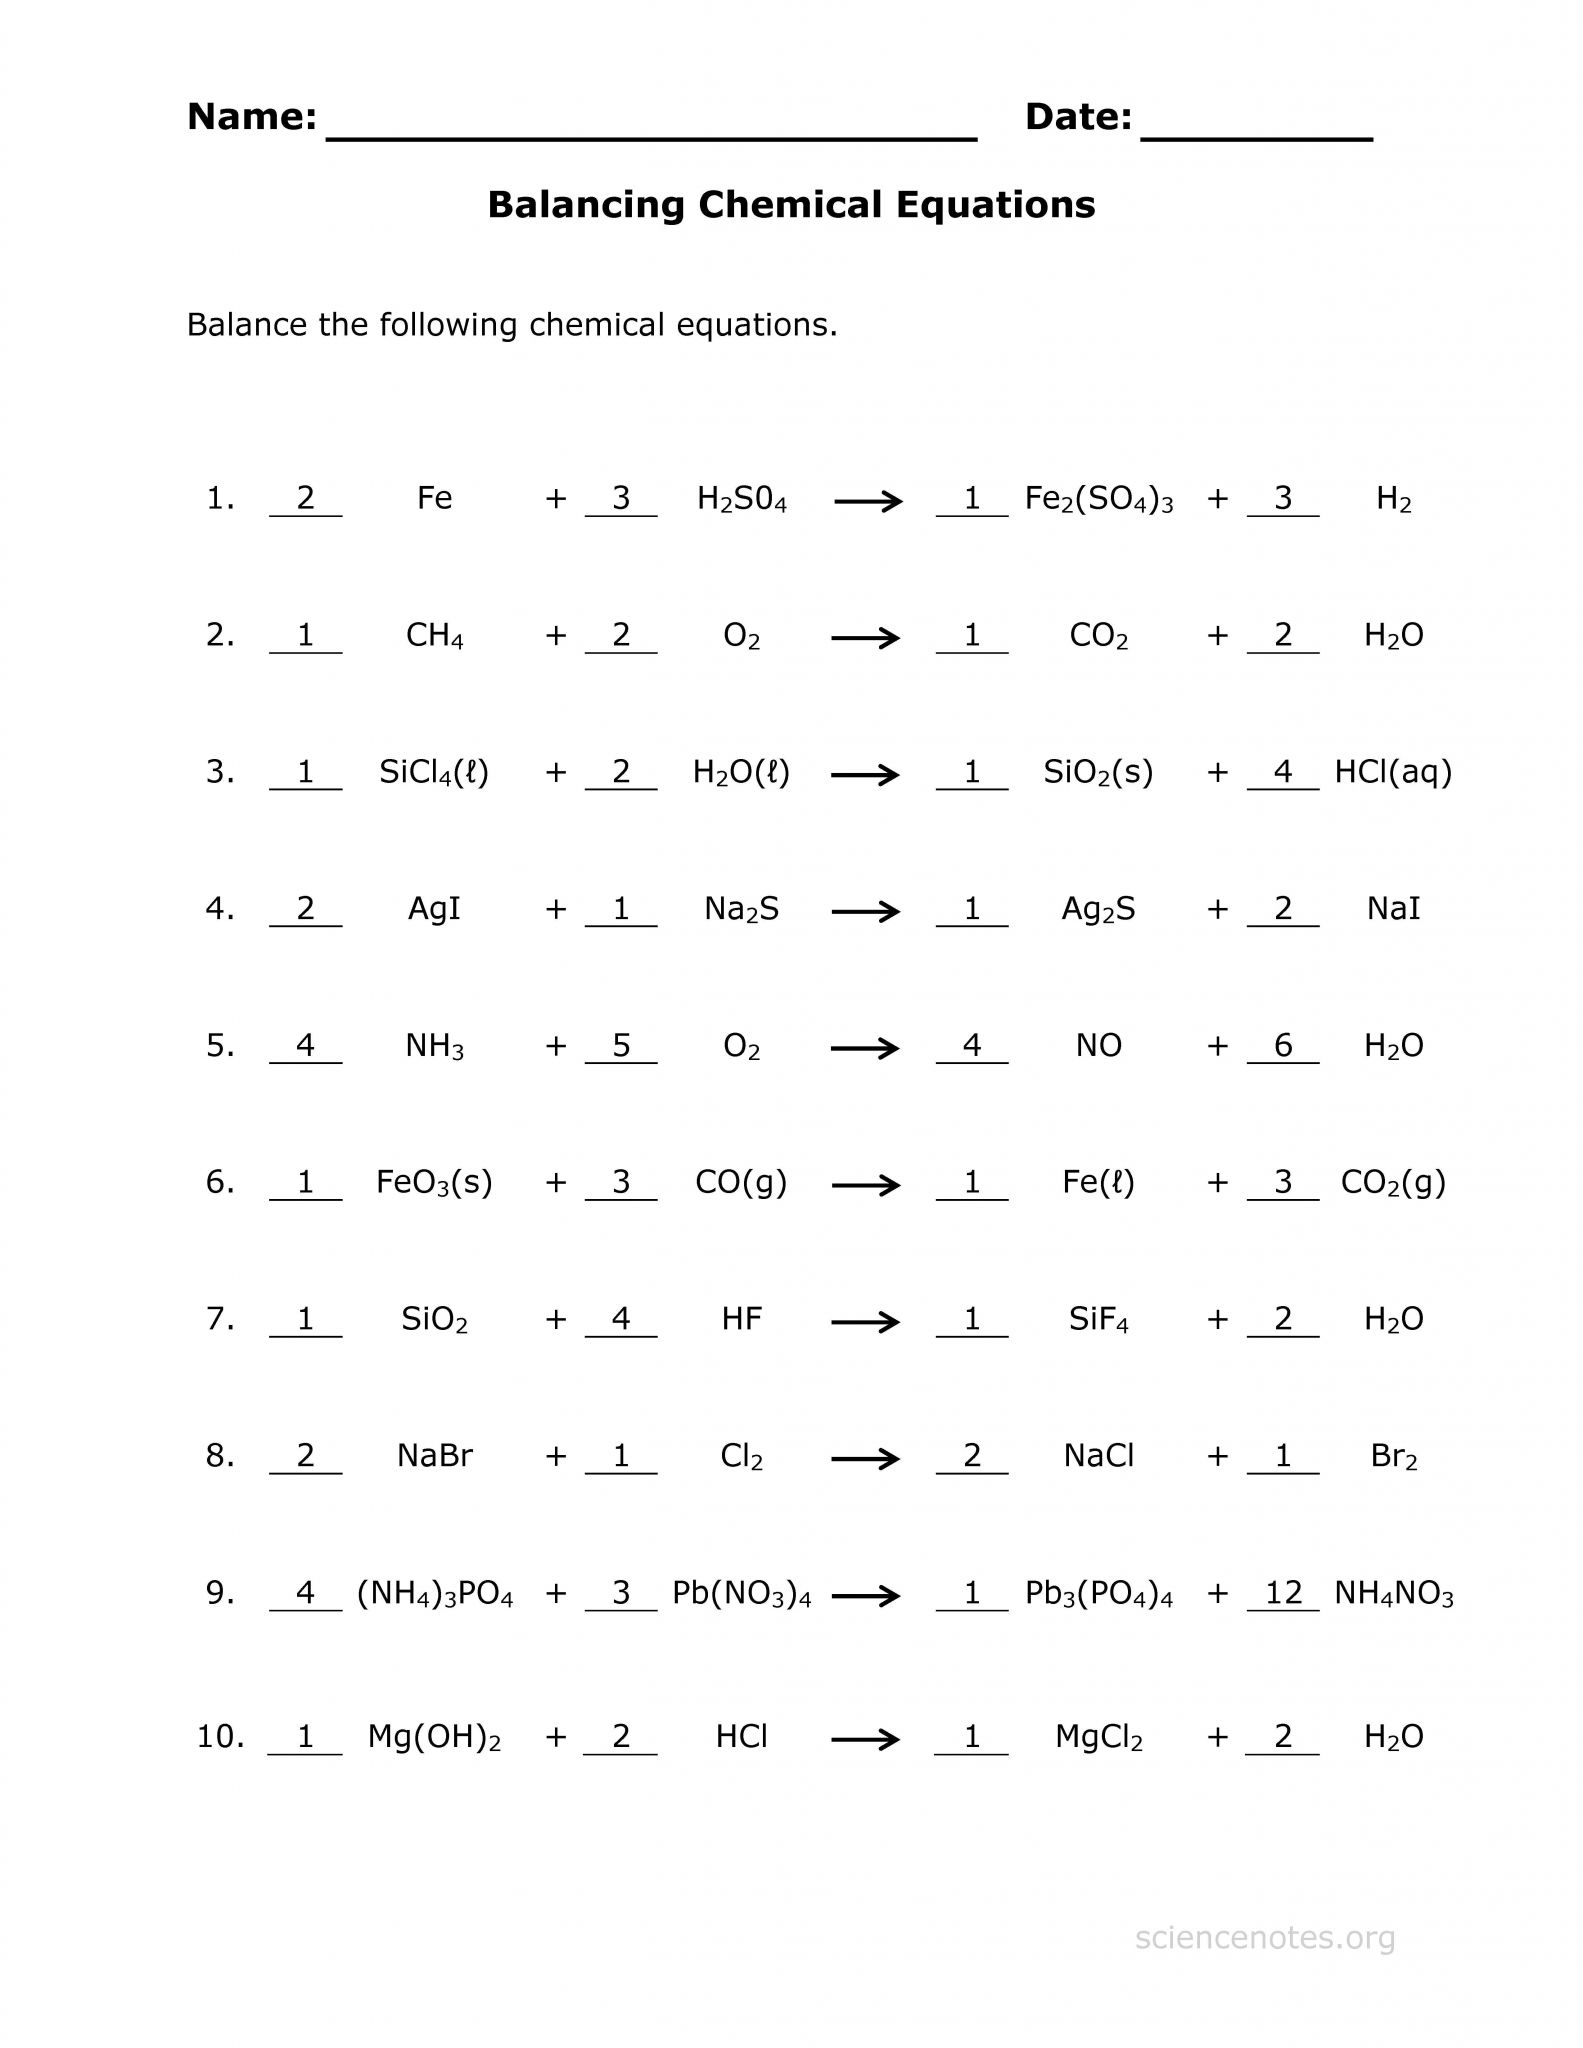 Physics Worksheets with Answers together with Answer Key for the Balance Chemical Equations Worksheet